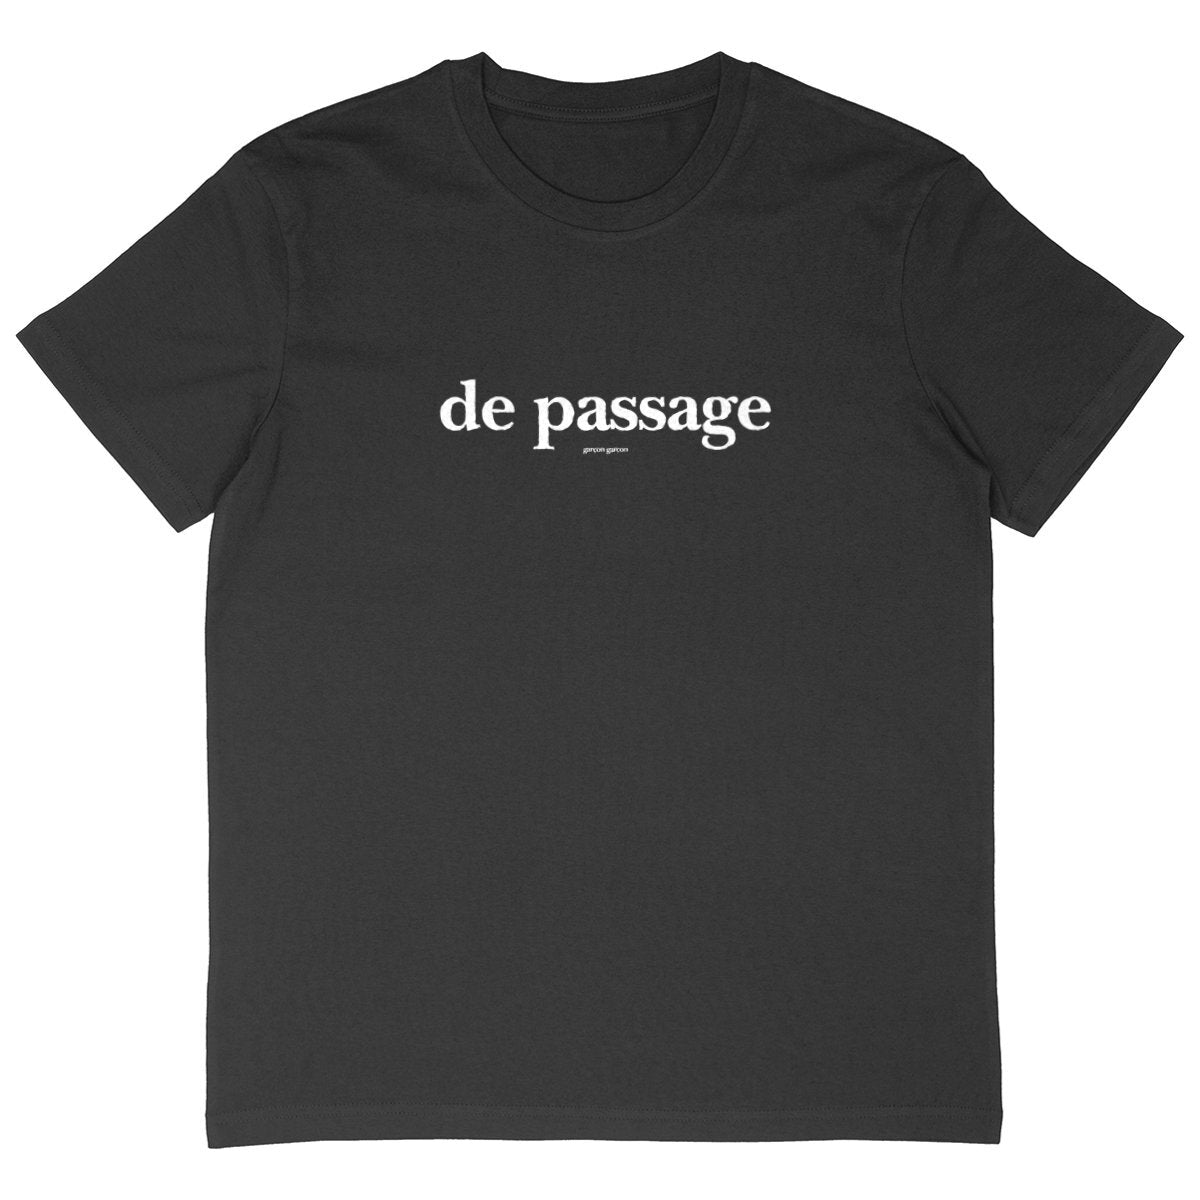 de passage BLACK OVERSIZED TEE; BLACK tee oversized.garçon garçon tee oversize BLACK. Dive into the essence of Parisian cool with this oversized tee. The subtle 'garçon garçon' signature whispers a chic narrative, offering a slice of the city's famed elegance. Perfect for those who speak style with simplicity.